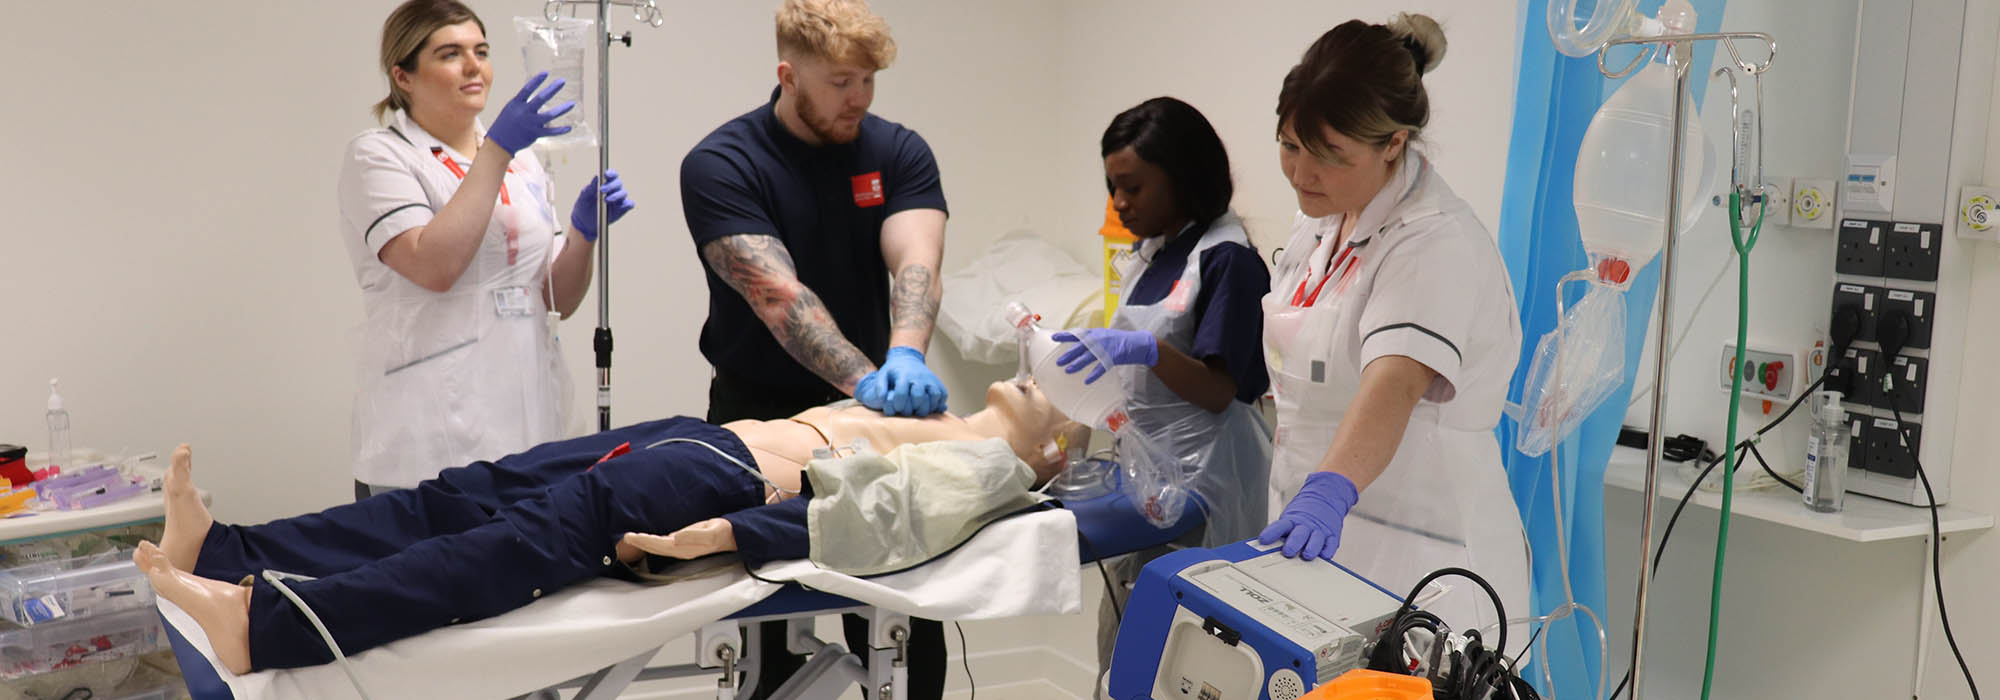 Clinical team take part in a training exercise in our simulation suite using a medical dummy